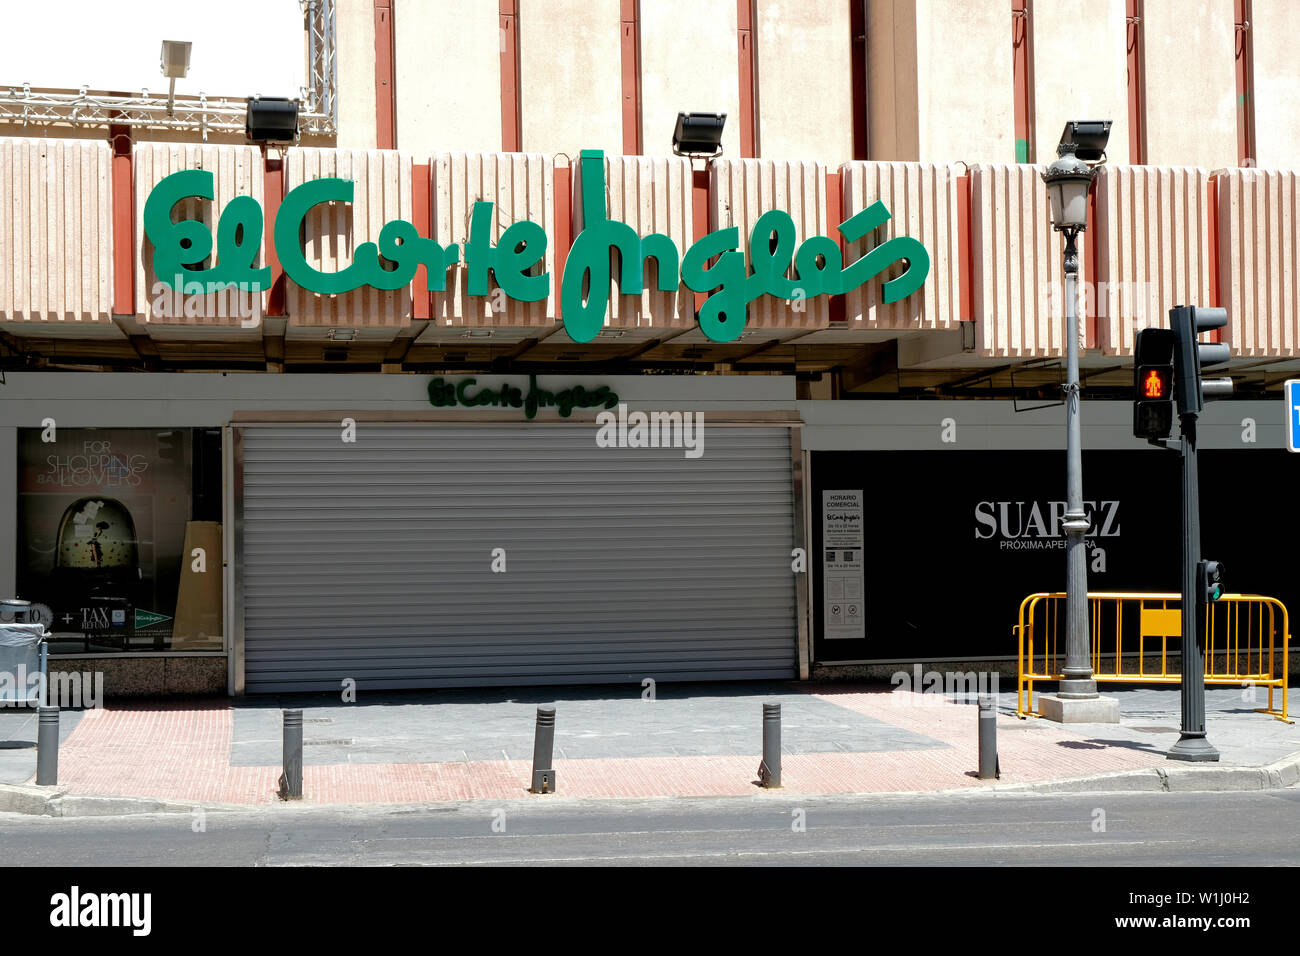 Exterior view of storefront and sign at El Corte Ingles department store in Granada, Spain; largest department store chain in Europe. Stock Photo